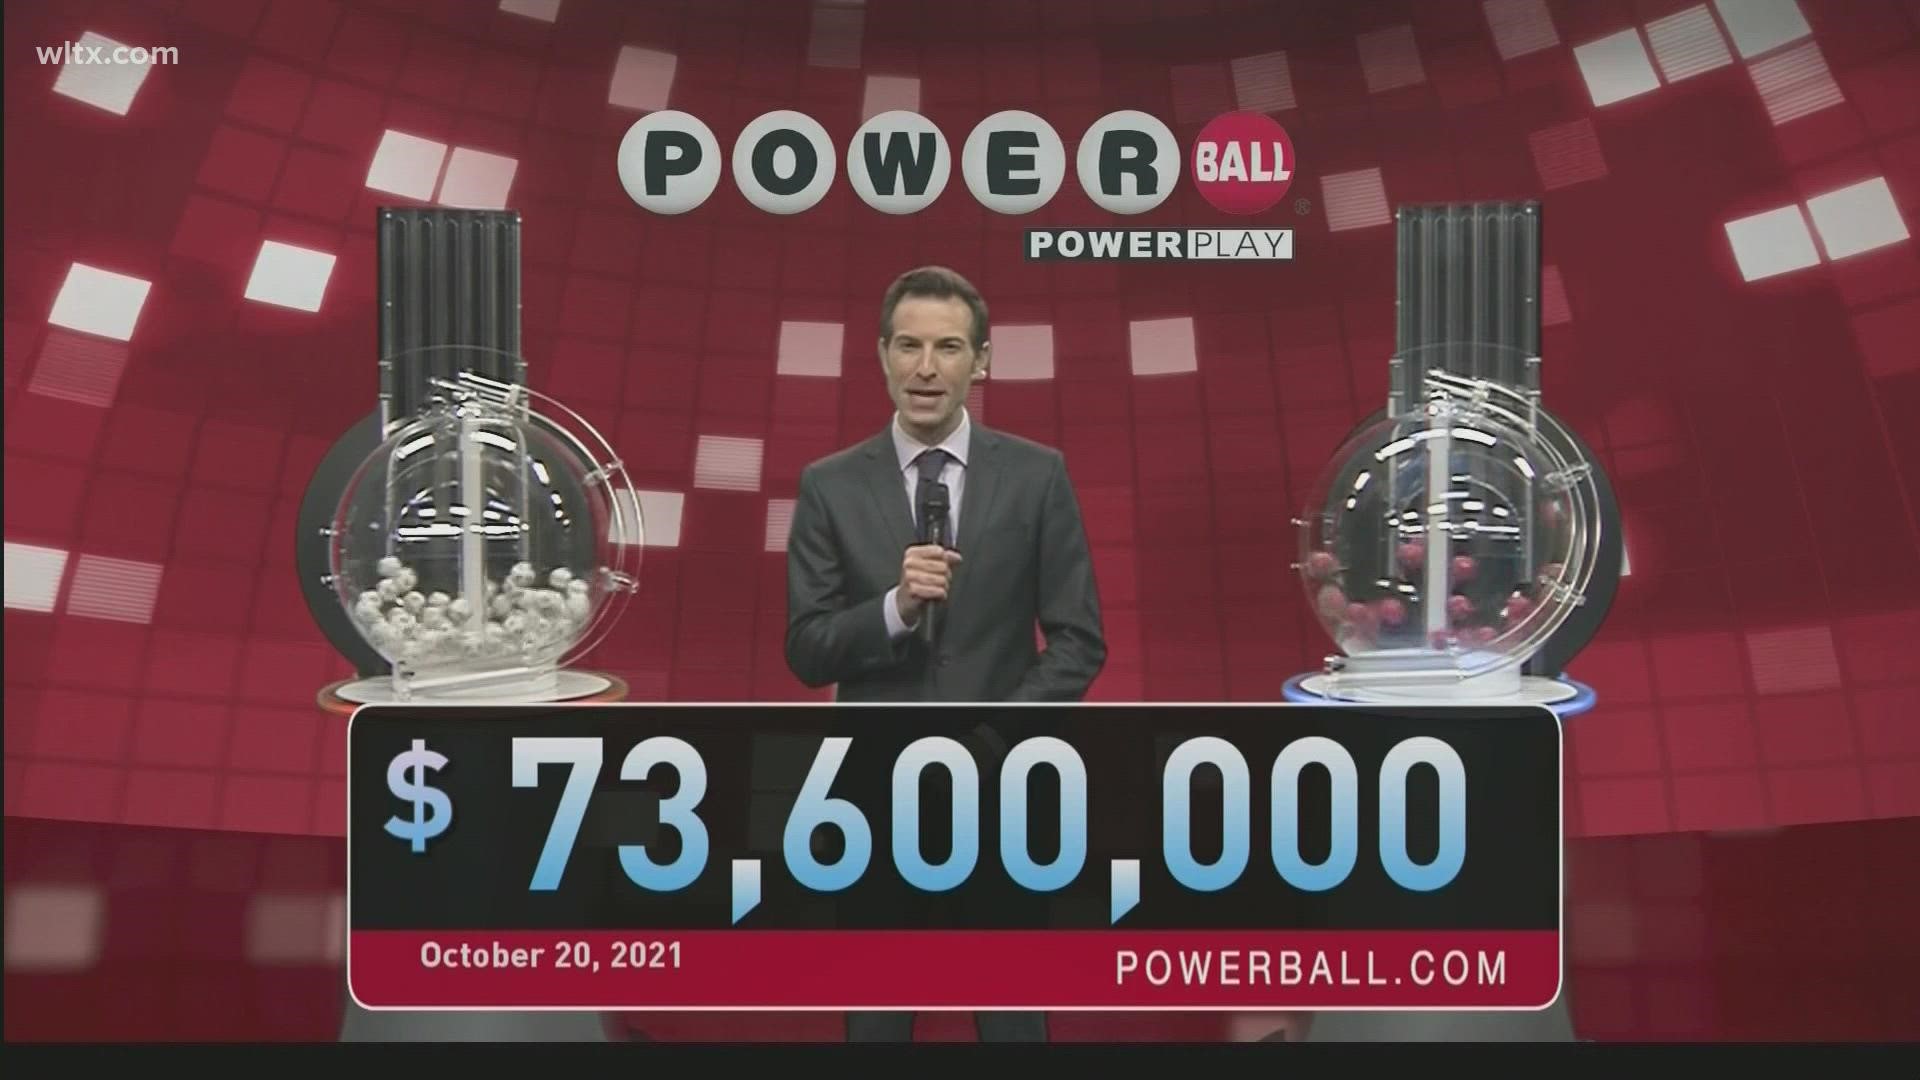 Here are the winning Powerball numbers for October 20, 2021.